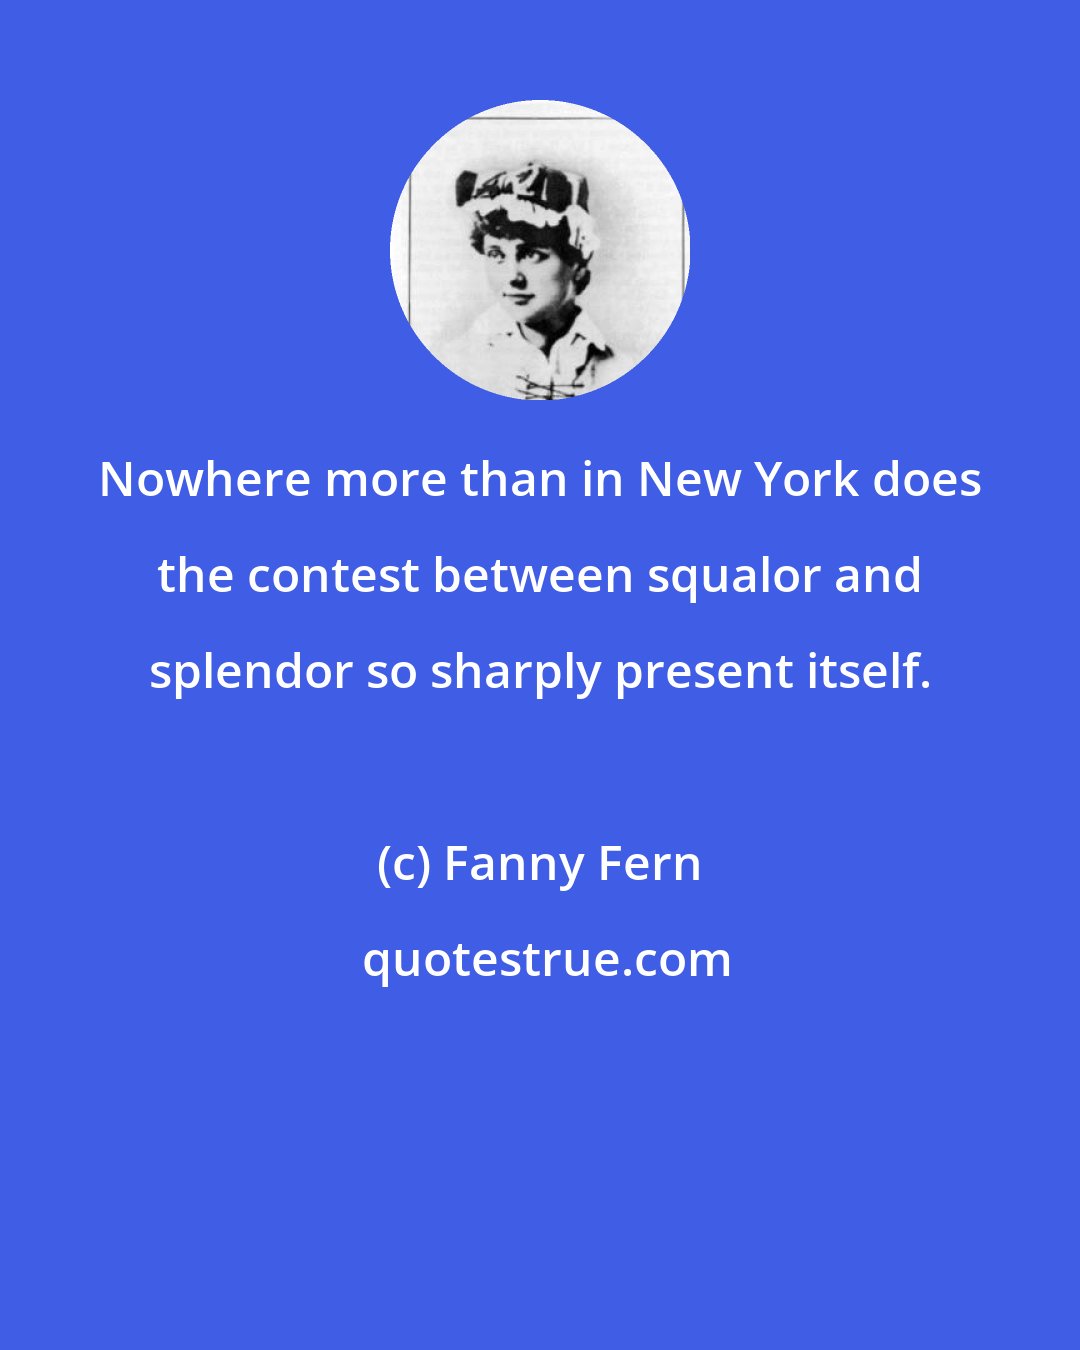 Fanny Fern: Nowhere more than in New York does the contest between squalor and splendor so sharply present itself.